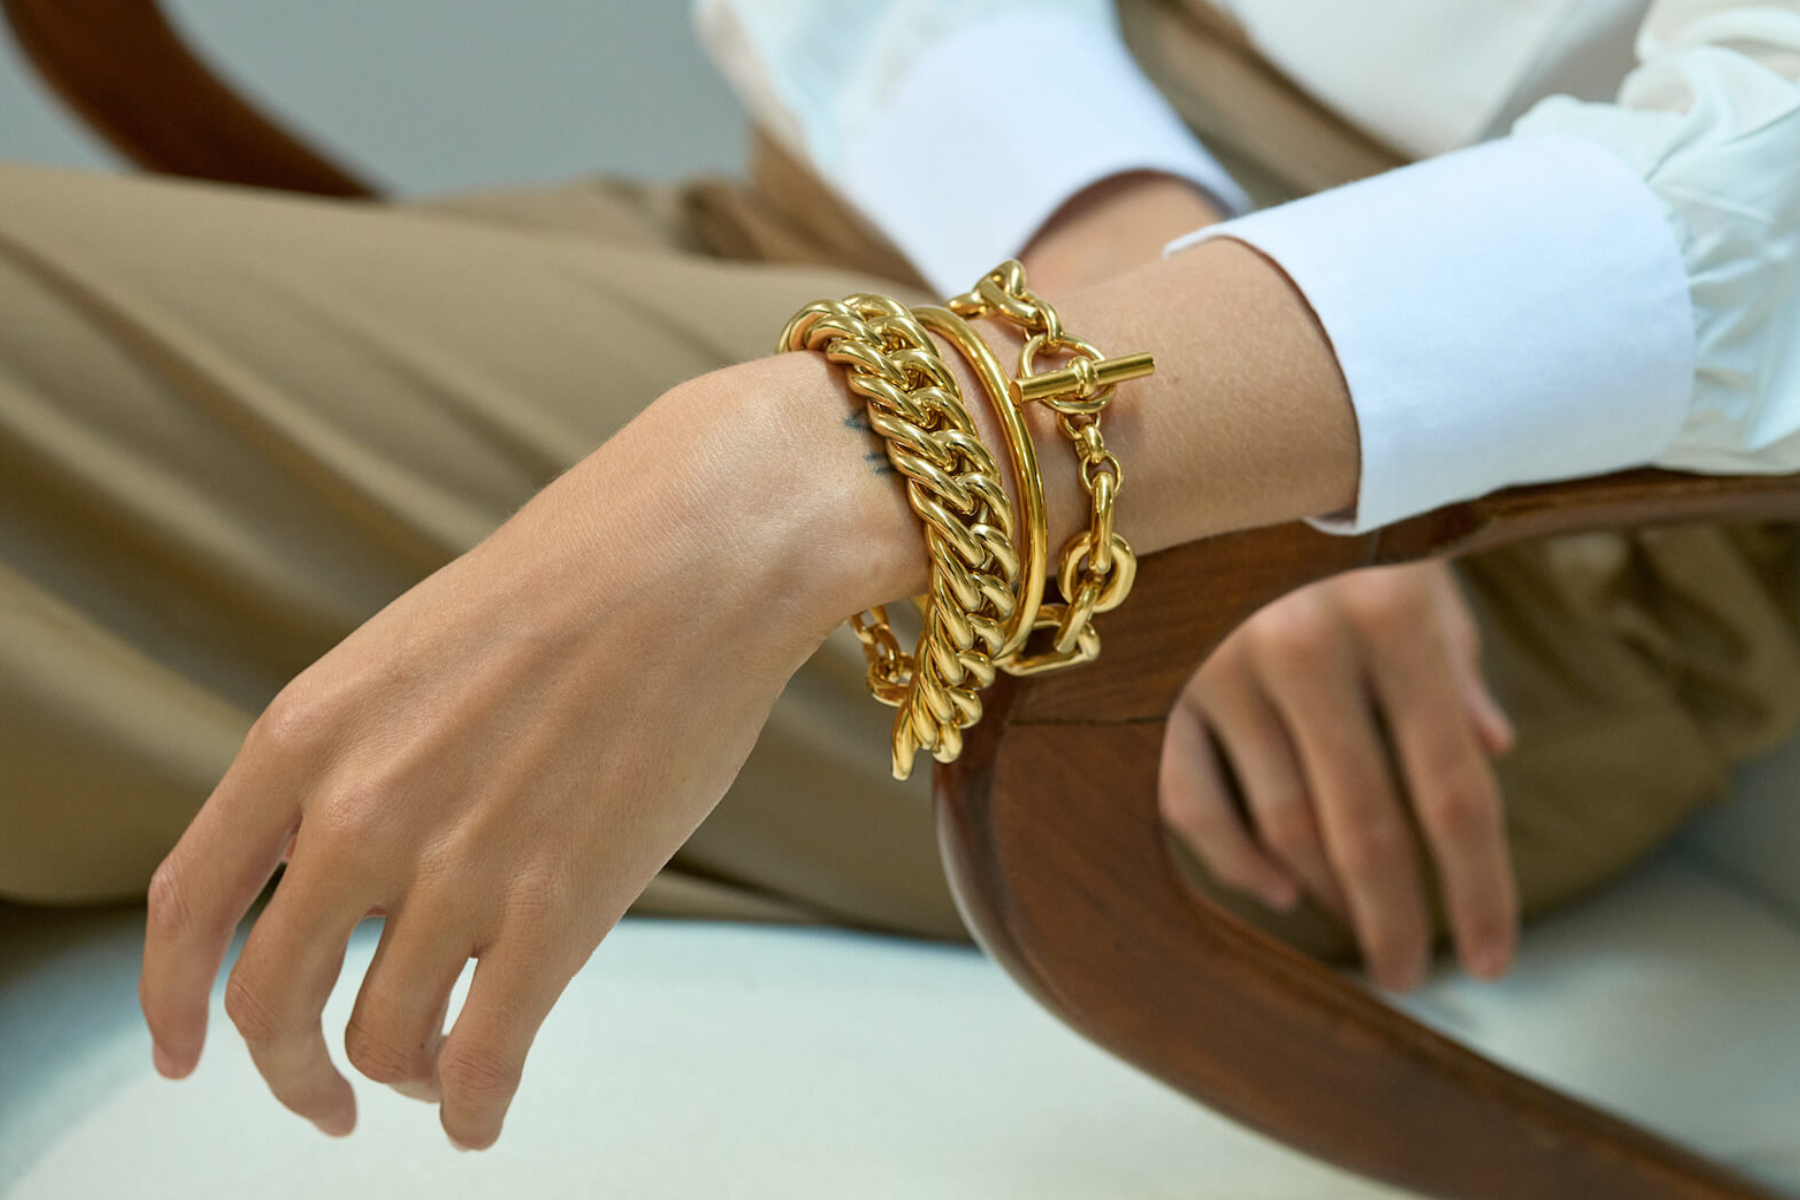 Chunky Bracelets Jewelry - The Latest Fashion Trend You Don't Want To Miss